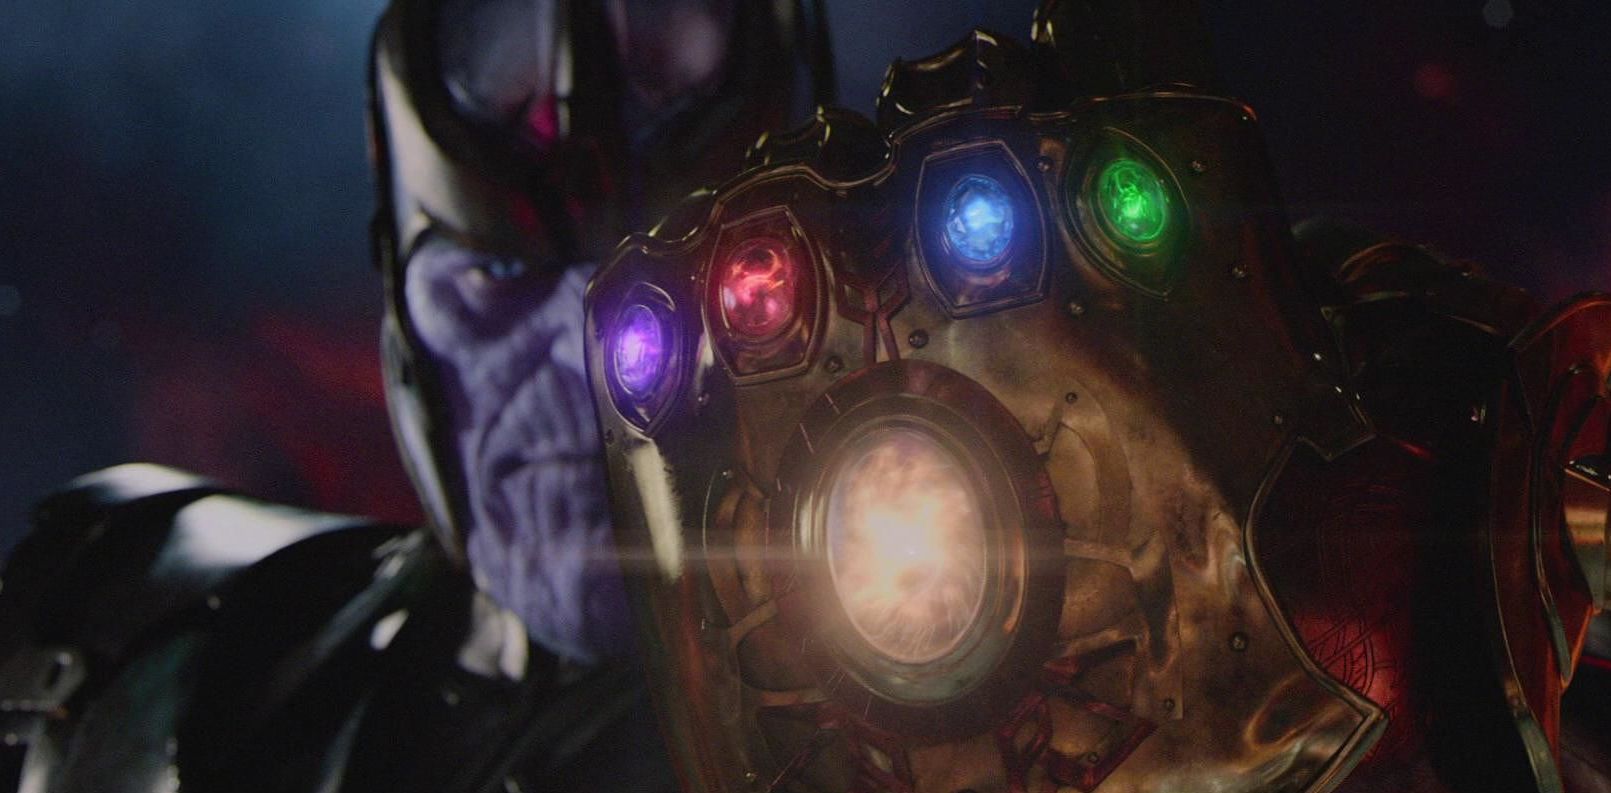 where are the infinity gems